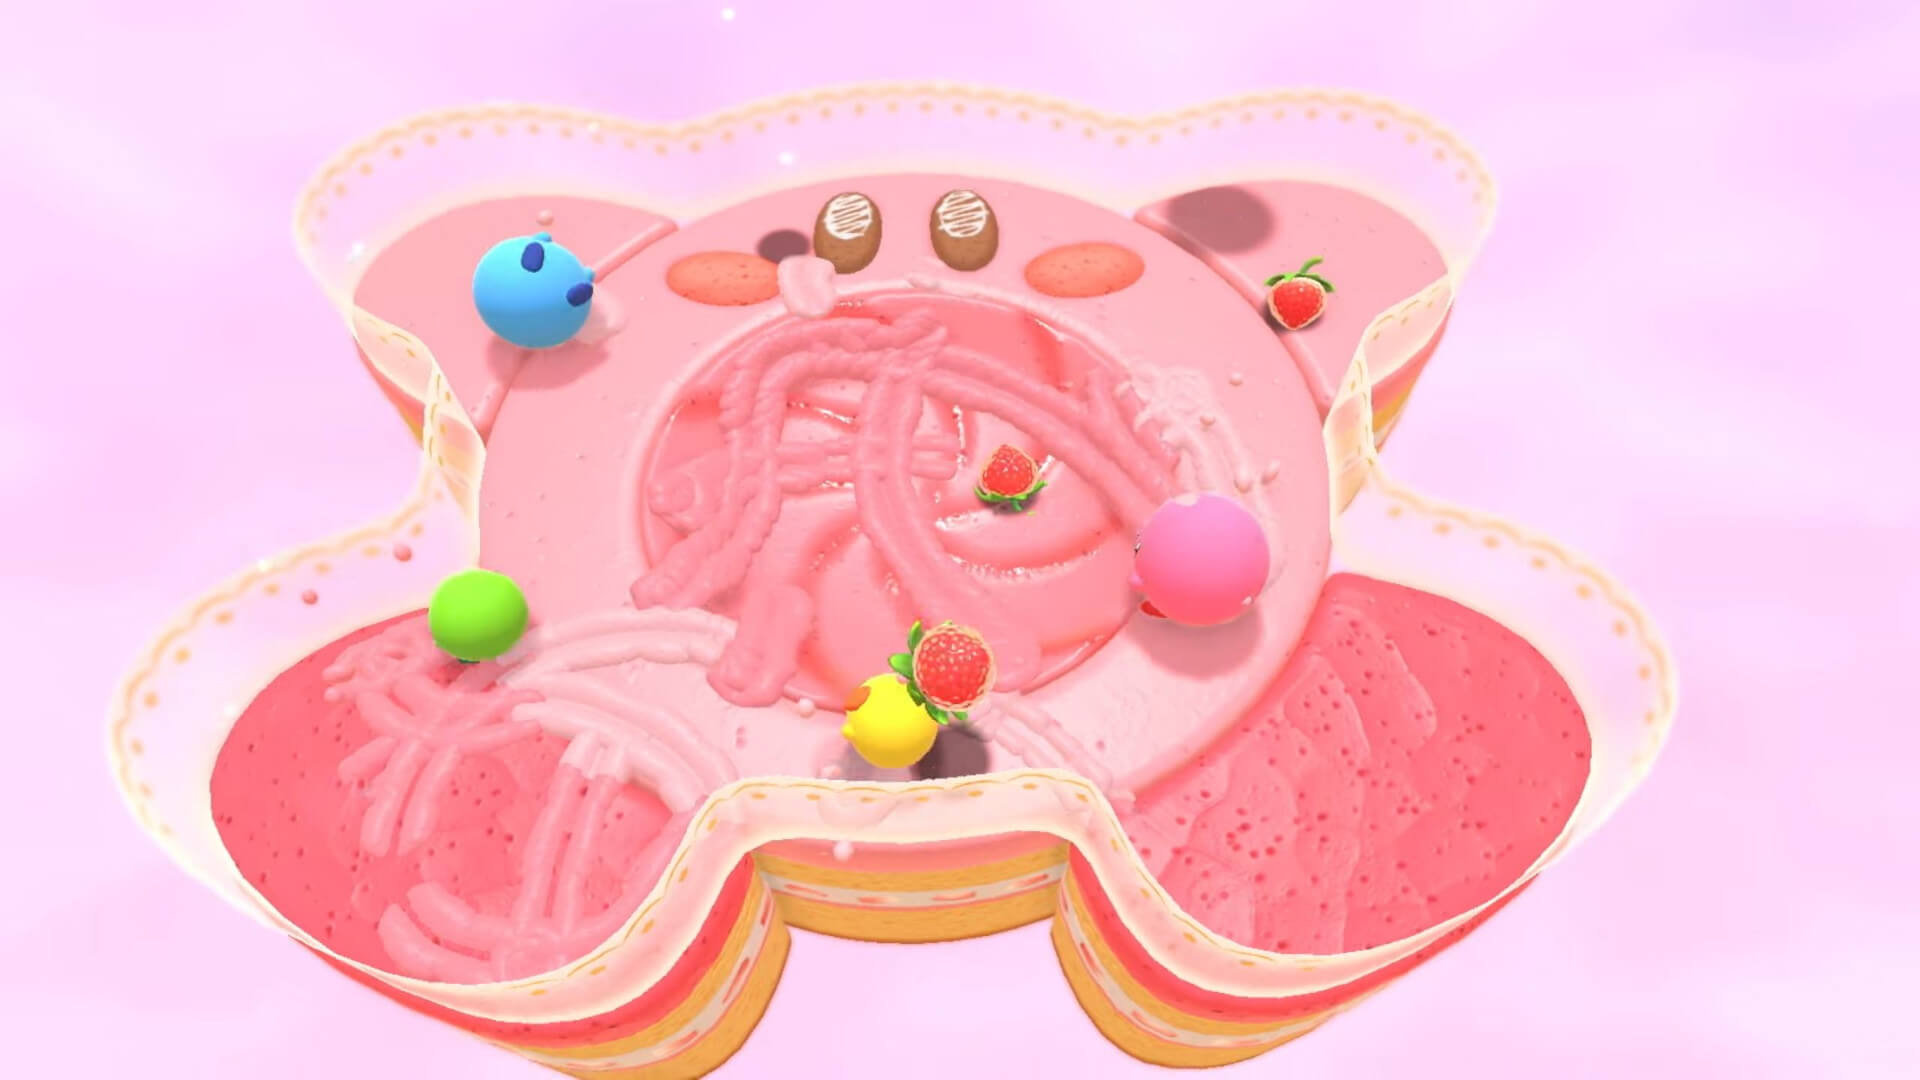 Players facing off against one another in Kirby's Dream Buffet